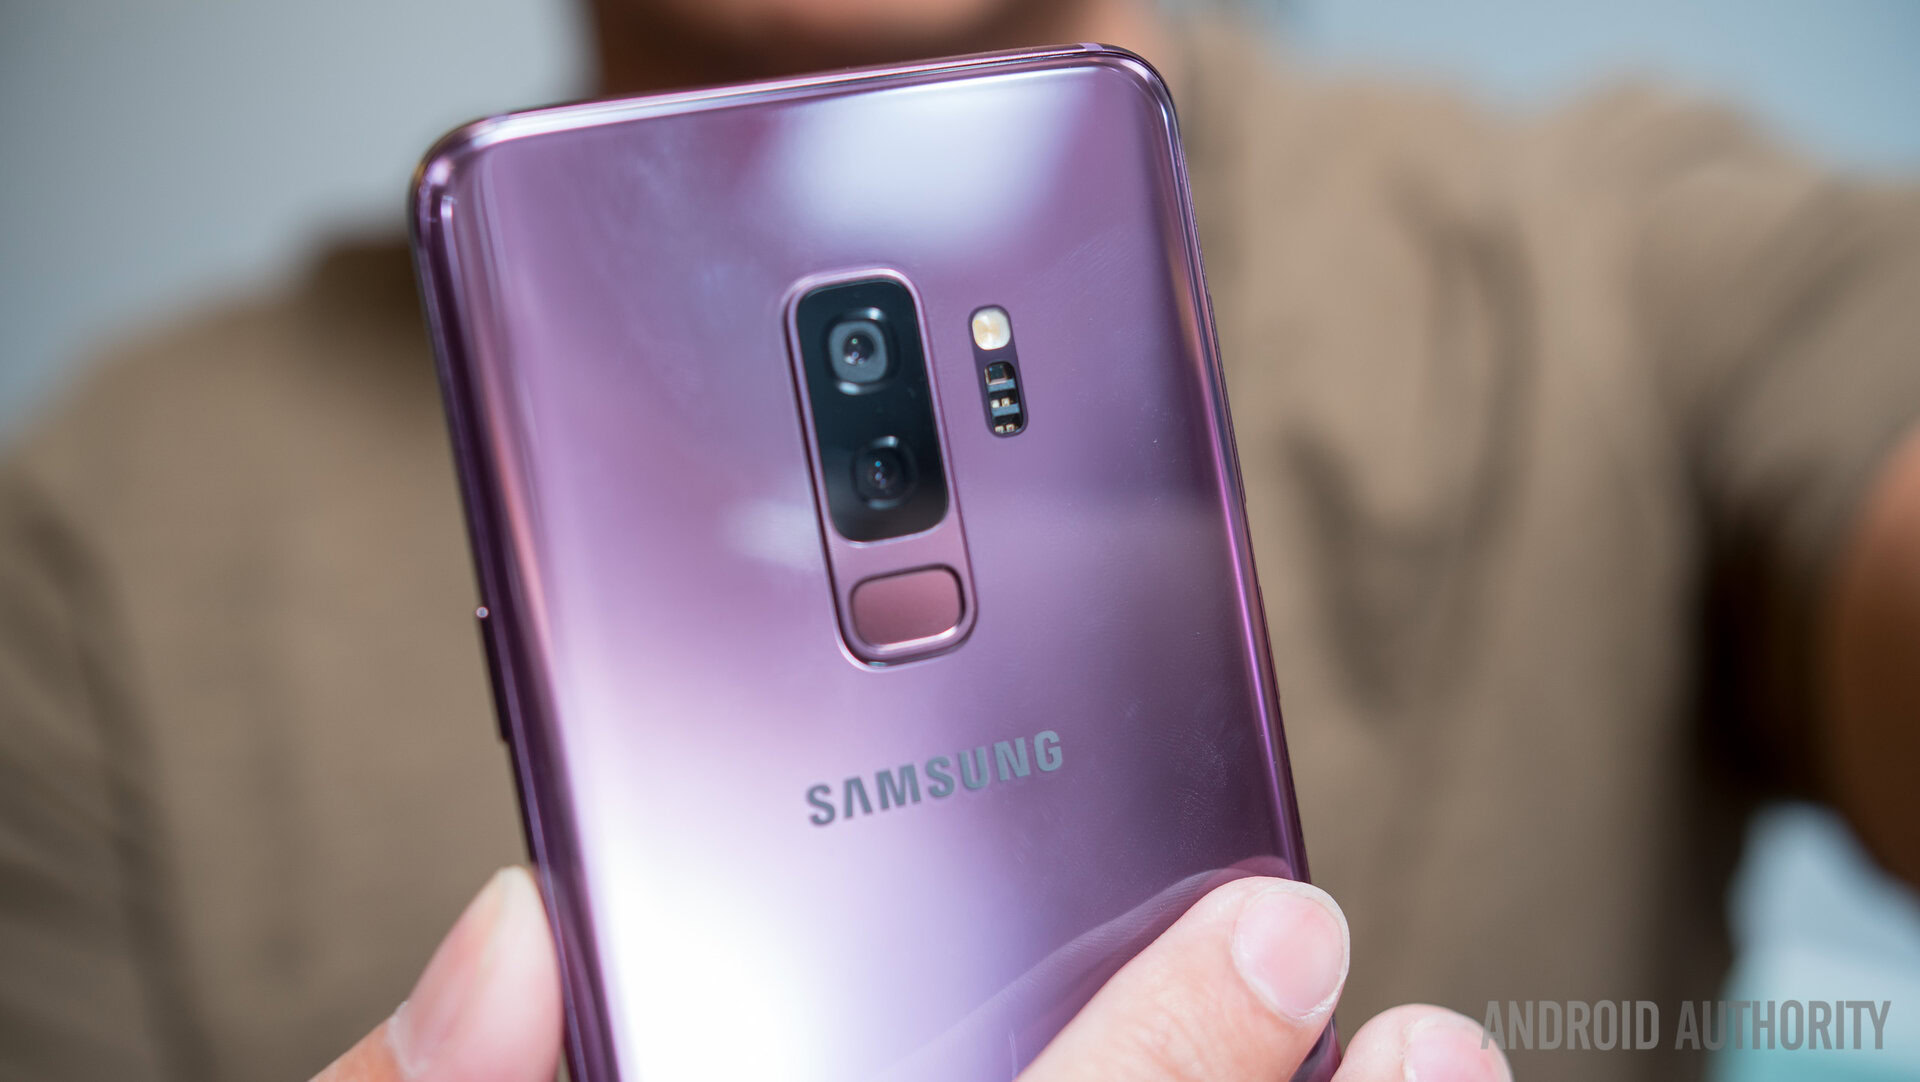 Samsung Galaxy S9 And S9 Plus Specs All About Refinements Android Authority